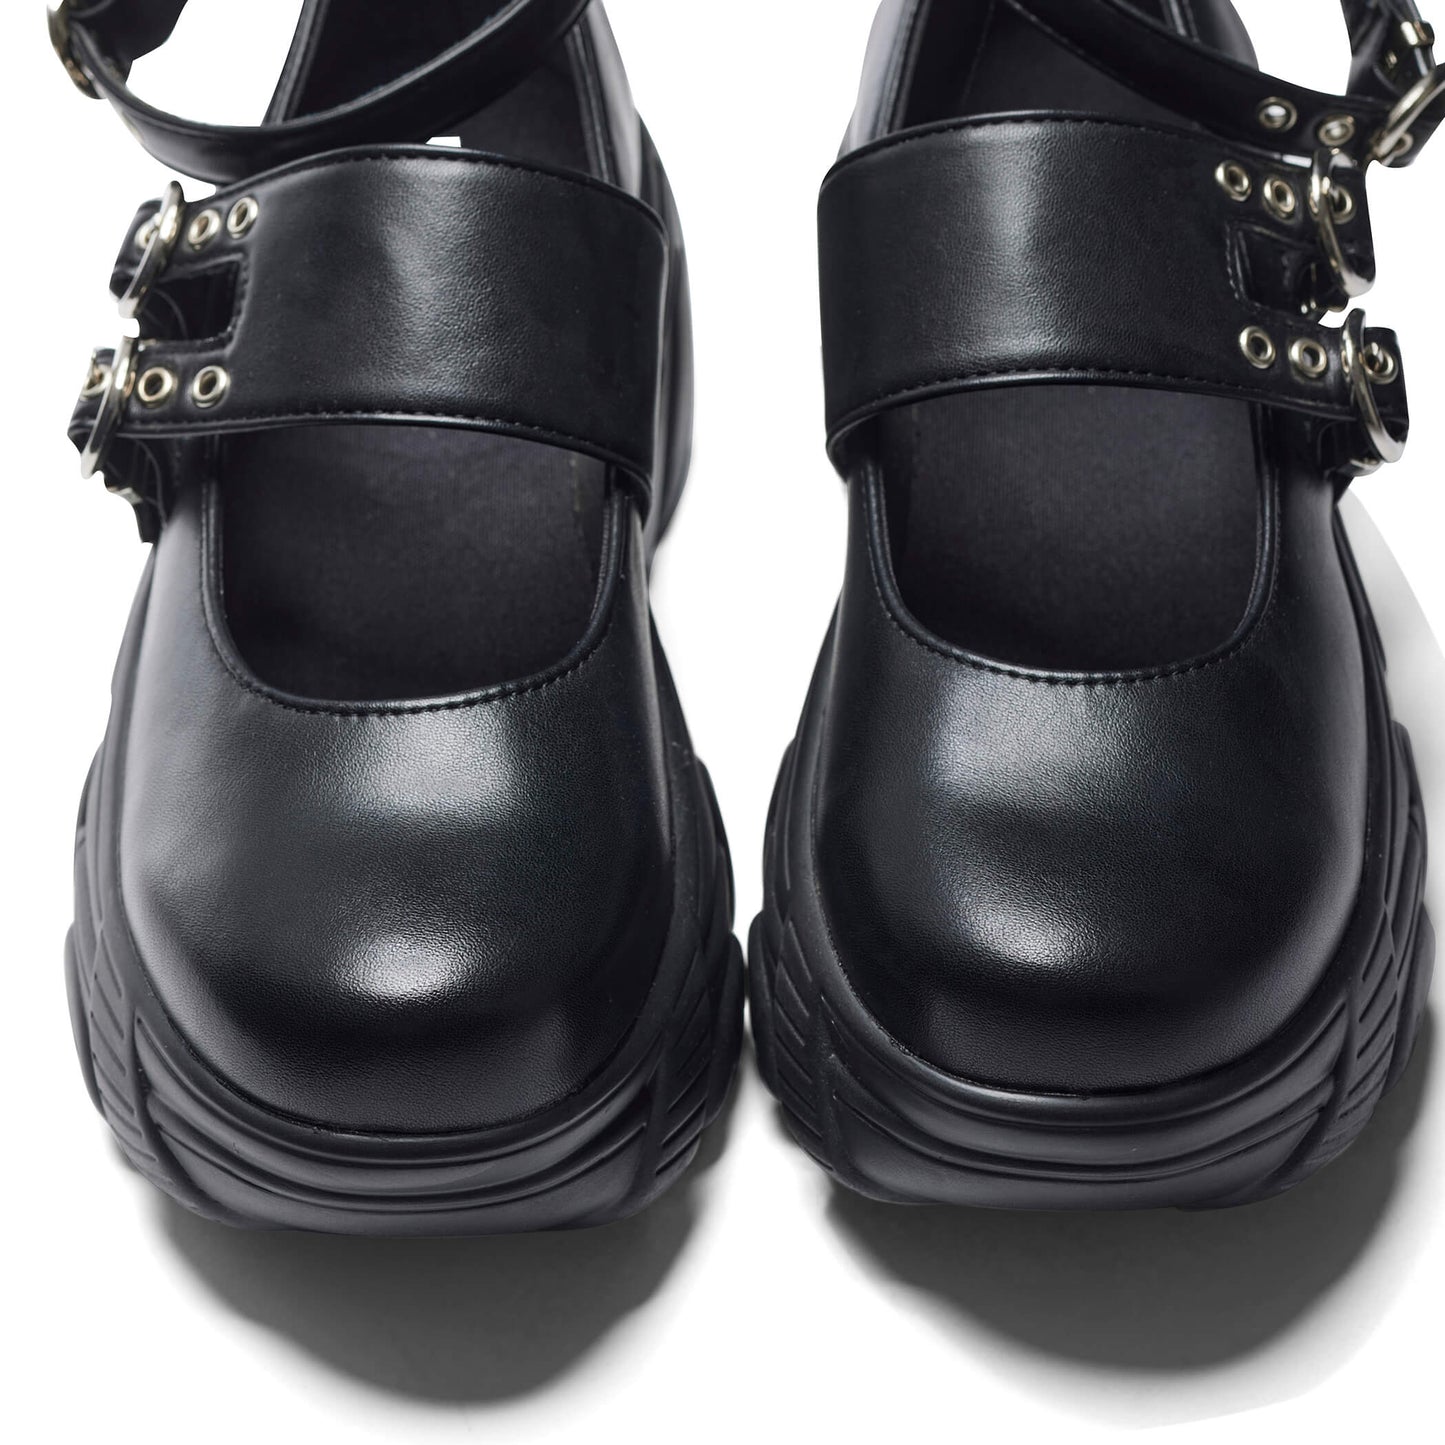 Seraphon Mystic Buckle Chunky Shoes - Black - Koi Footwear - Front View